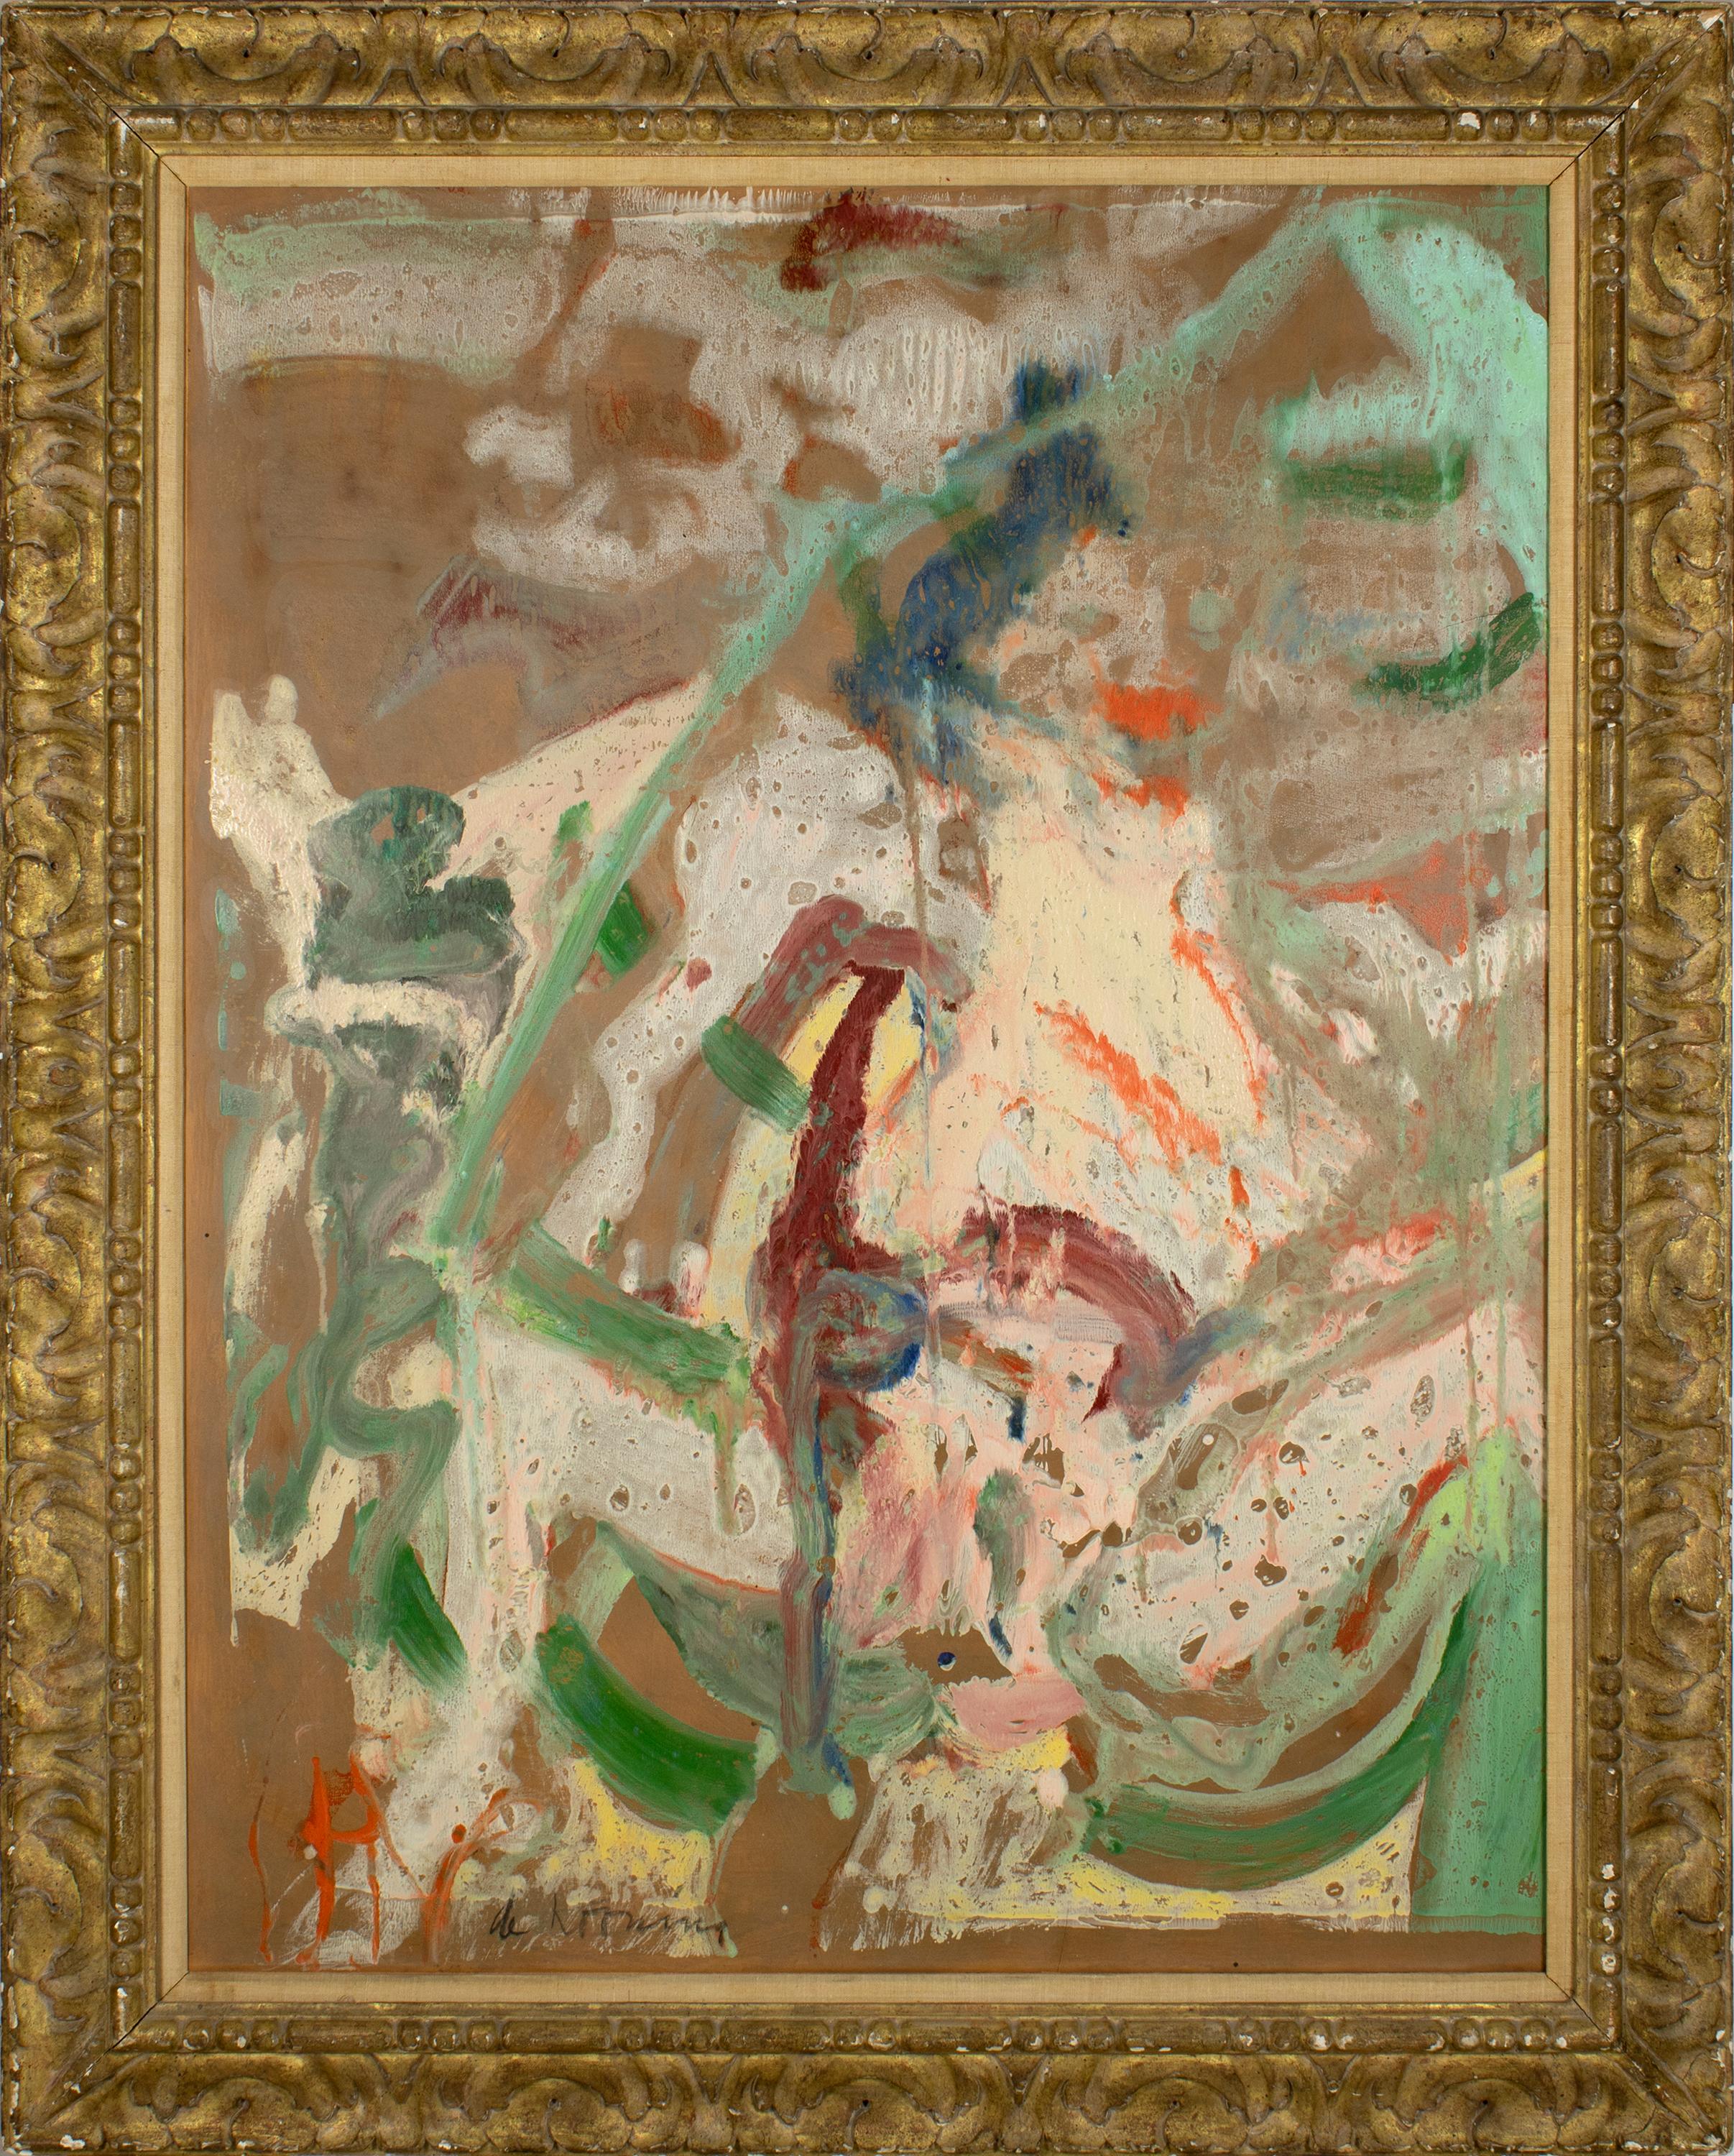 Woman in a Rowboat (Braun), Abstract Painting, von Willem de Kooning